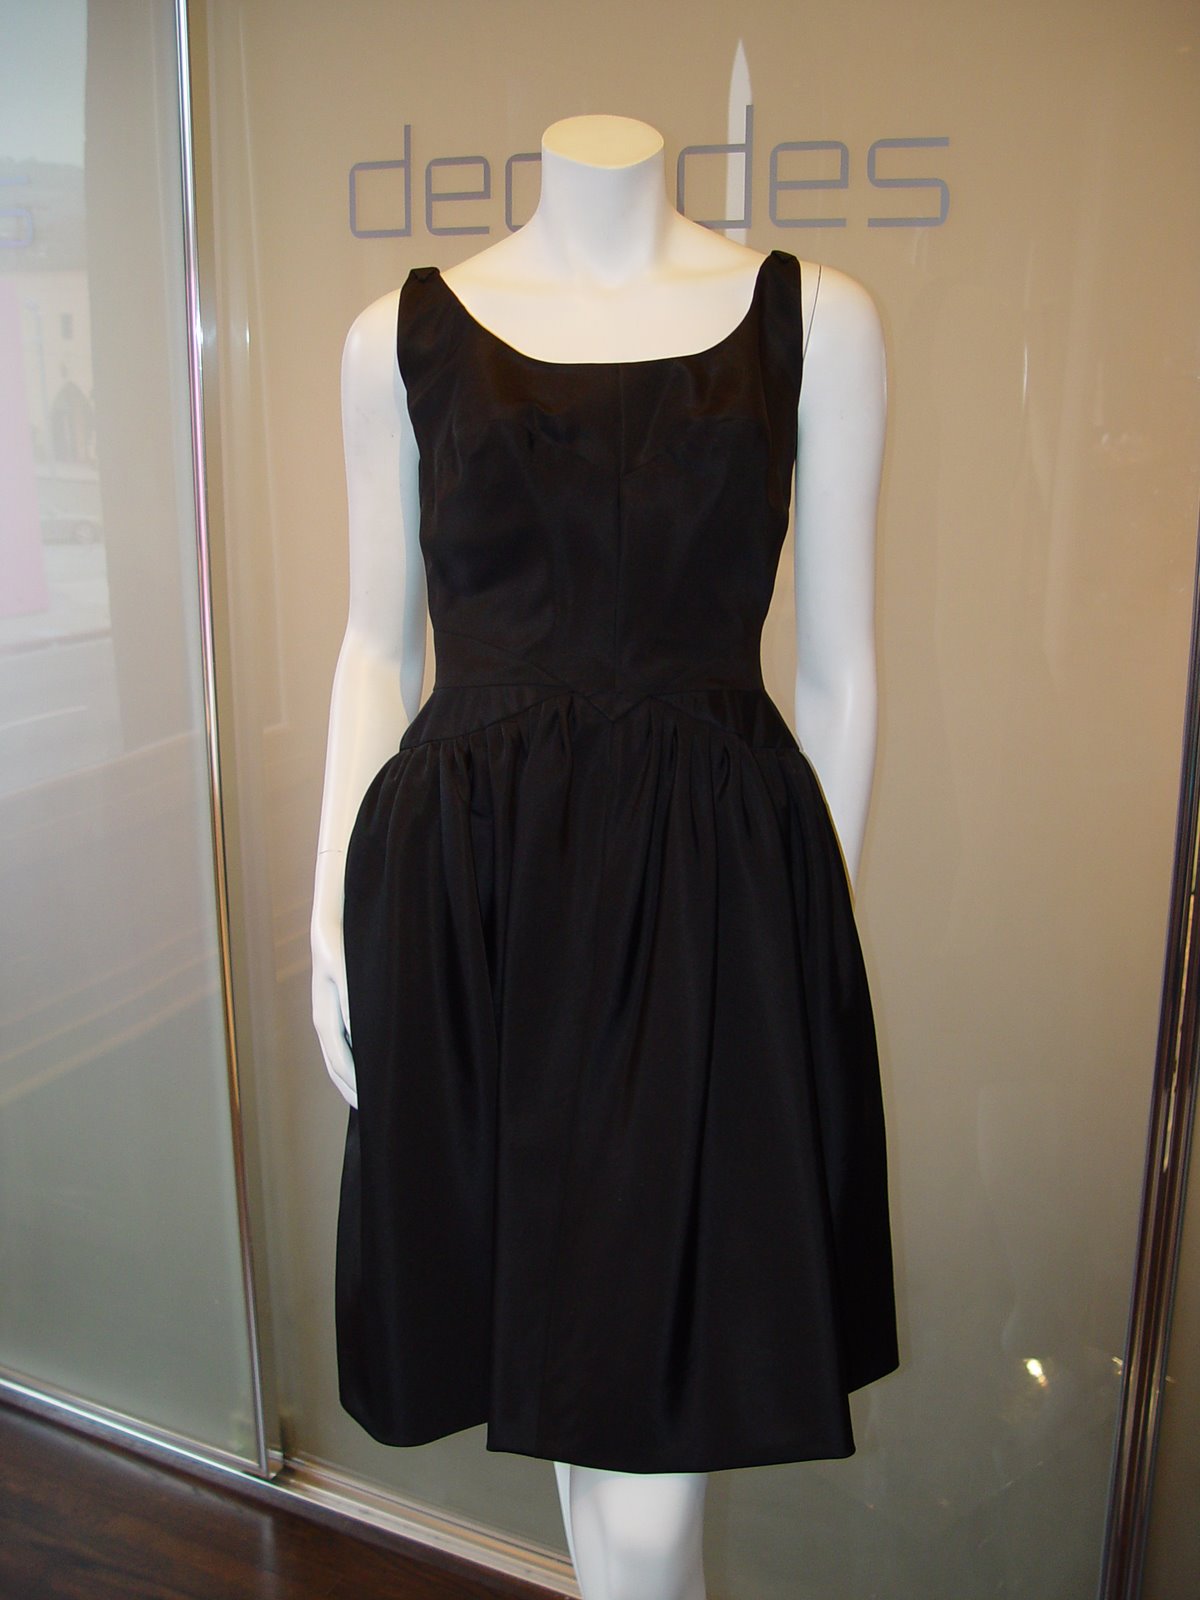 [PAULINE+TIRGERE+LATE+50S+BLACK+DRESS+WITH+ROUND+NECK+AND+LOW+BACK+WITH+FULL+SKIRT.JPG.JPG]